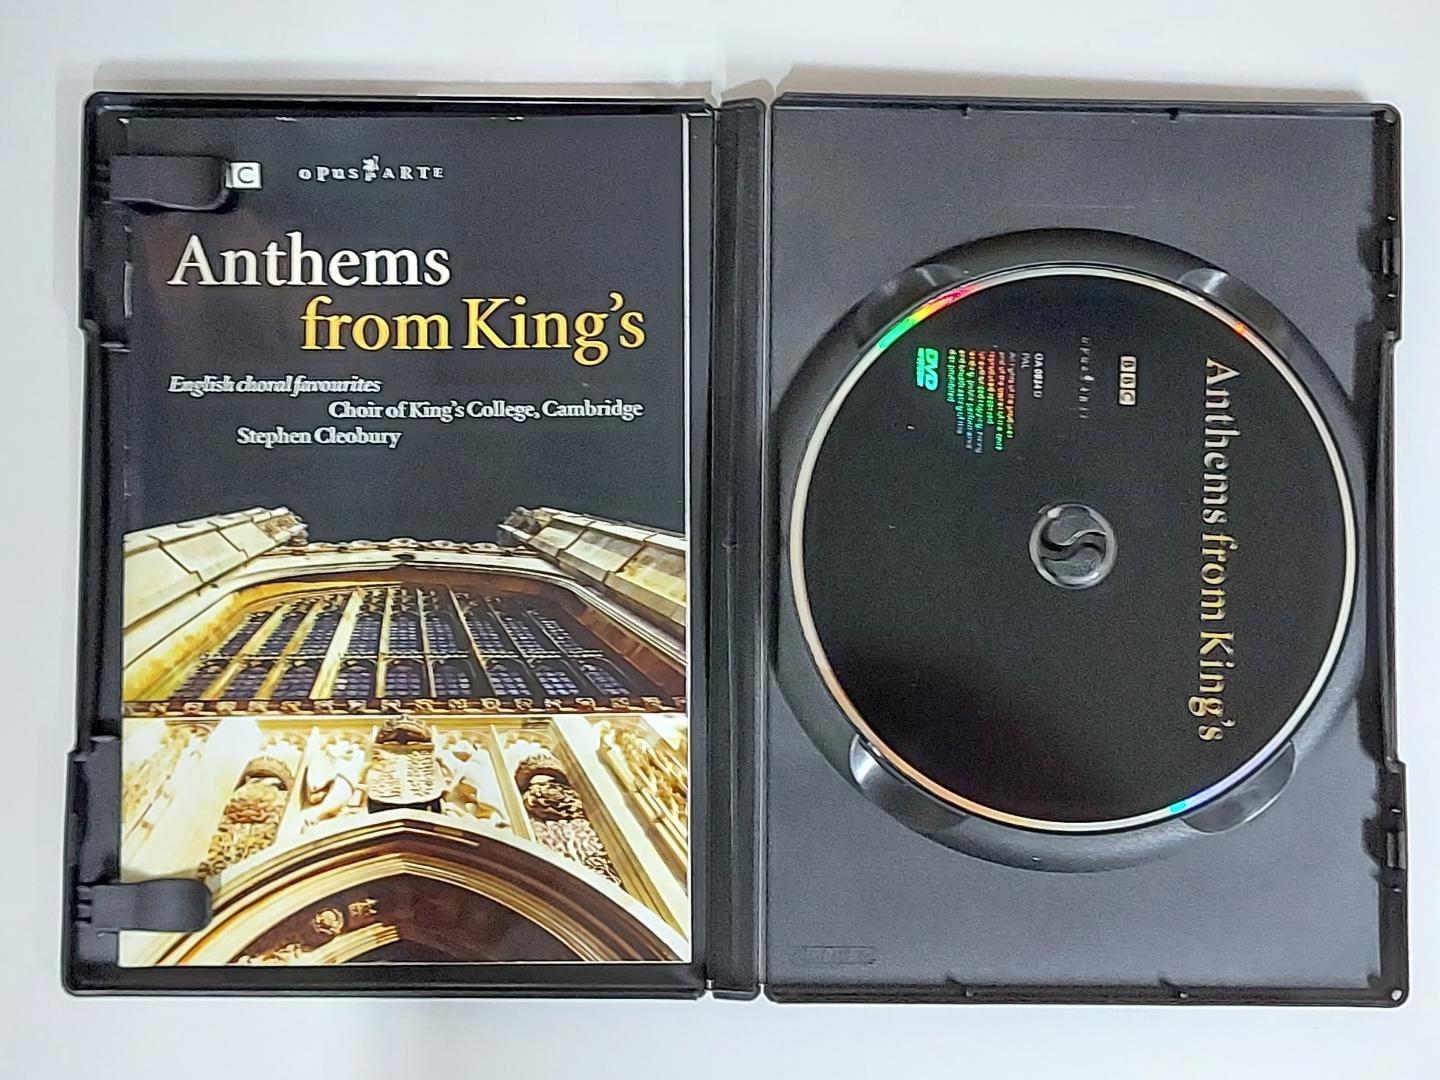 Cleobury, Stephen - Anthems from King's. English choral favorites